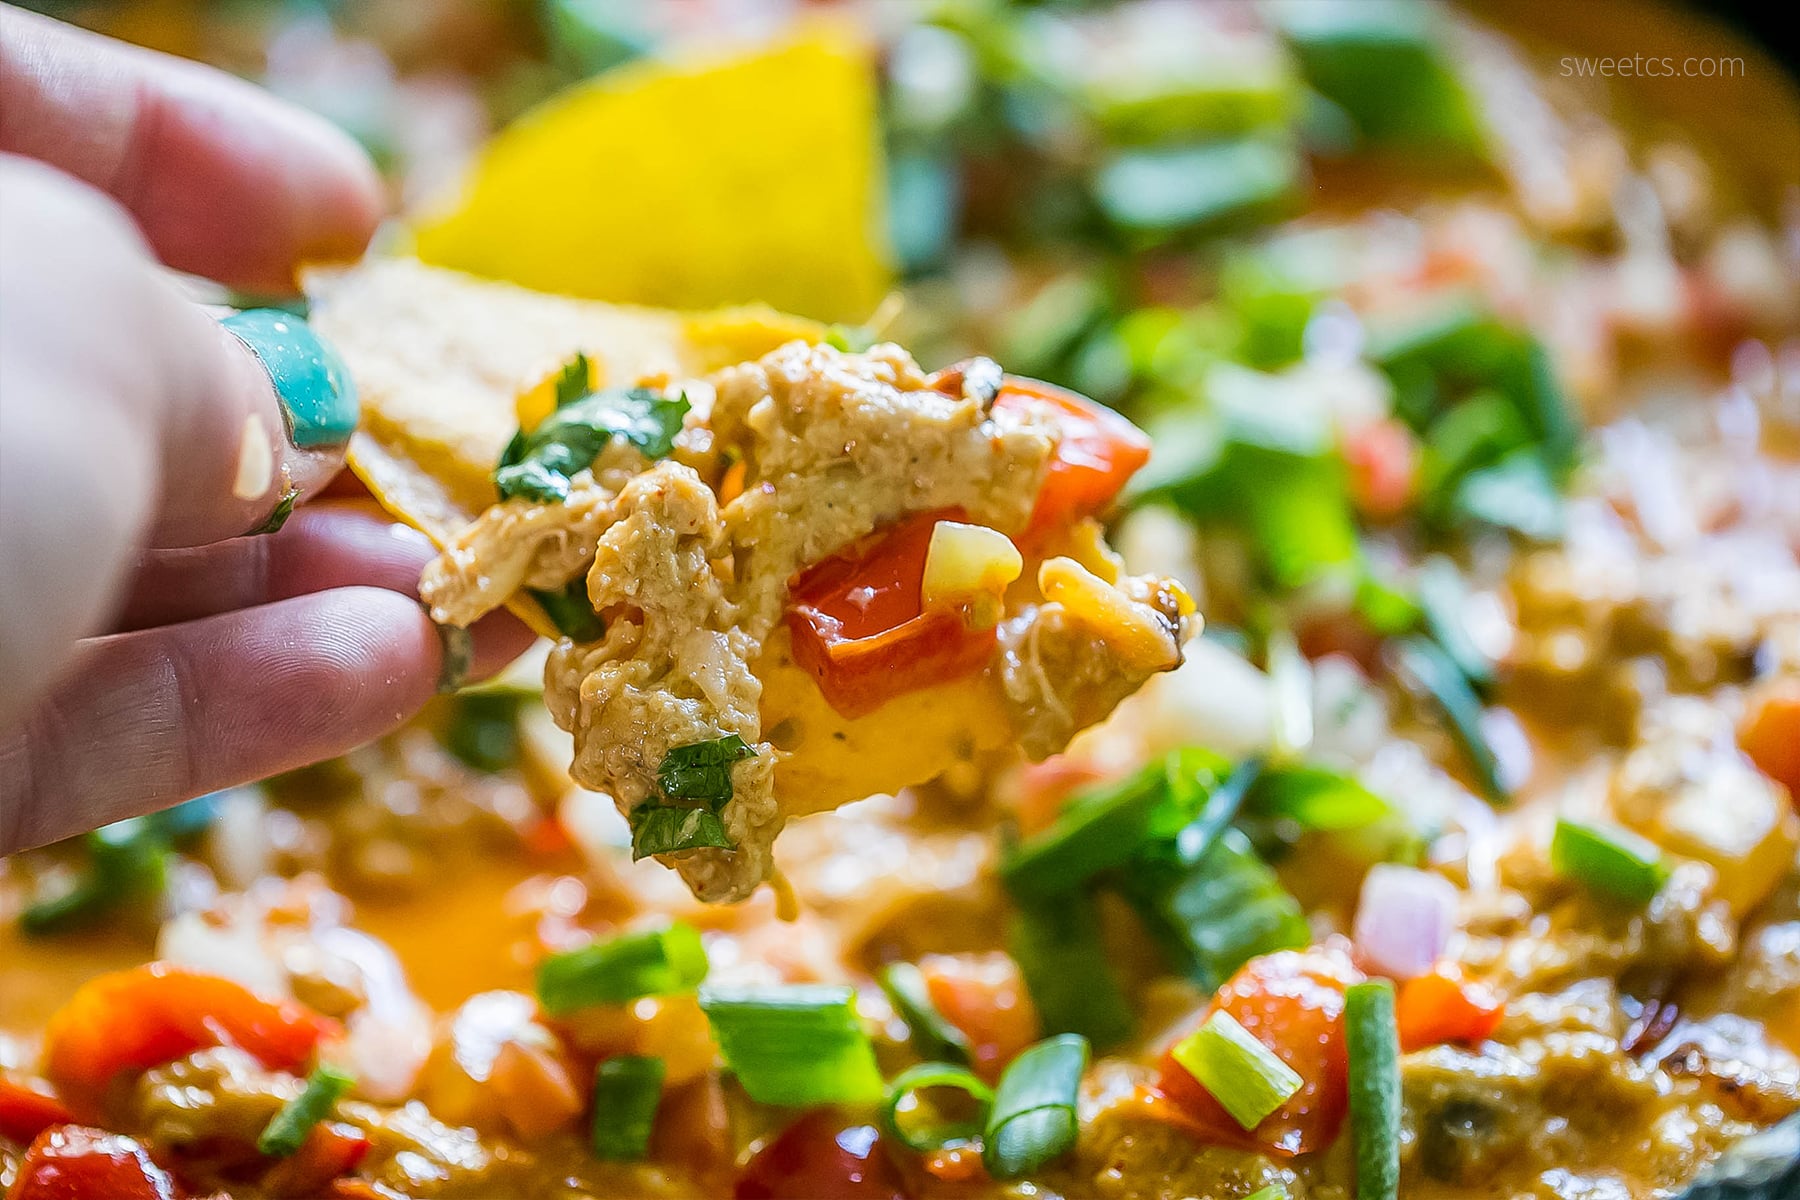 This dip is so delicious- tons of cheesy chicken enchilada flavor, and so easy!